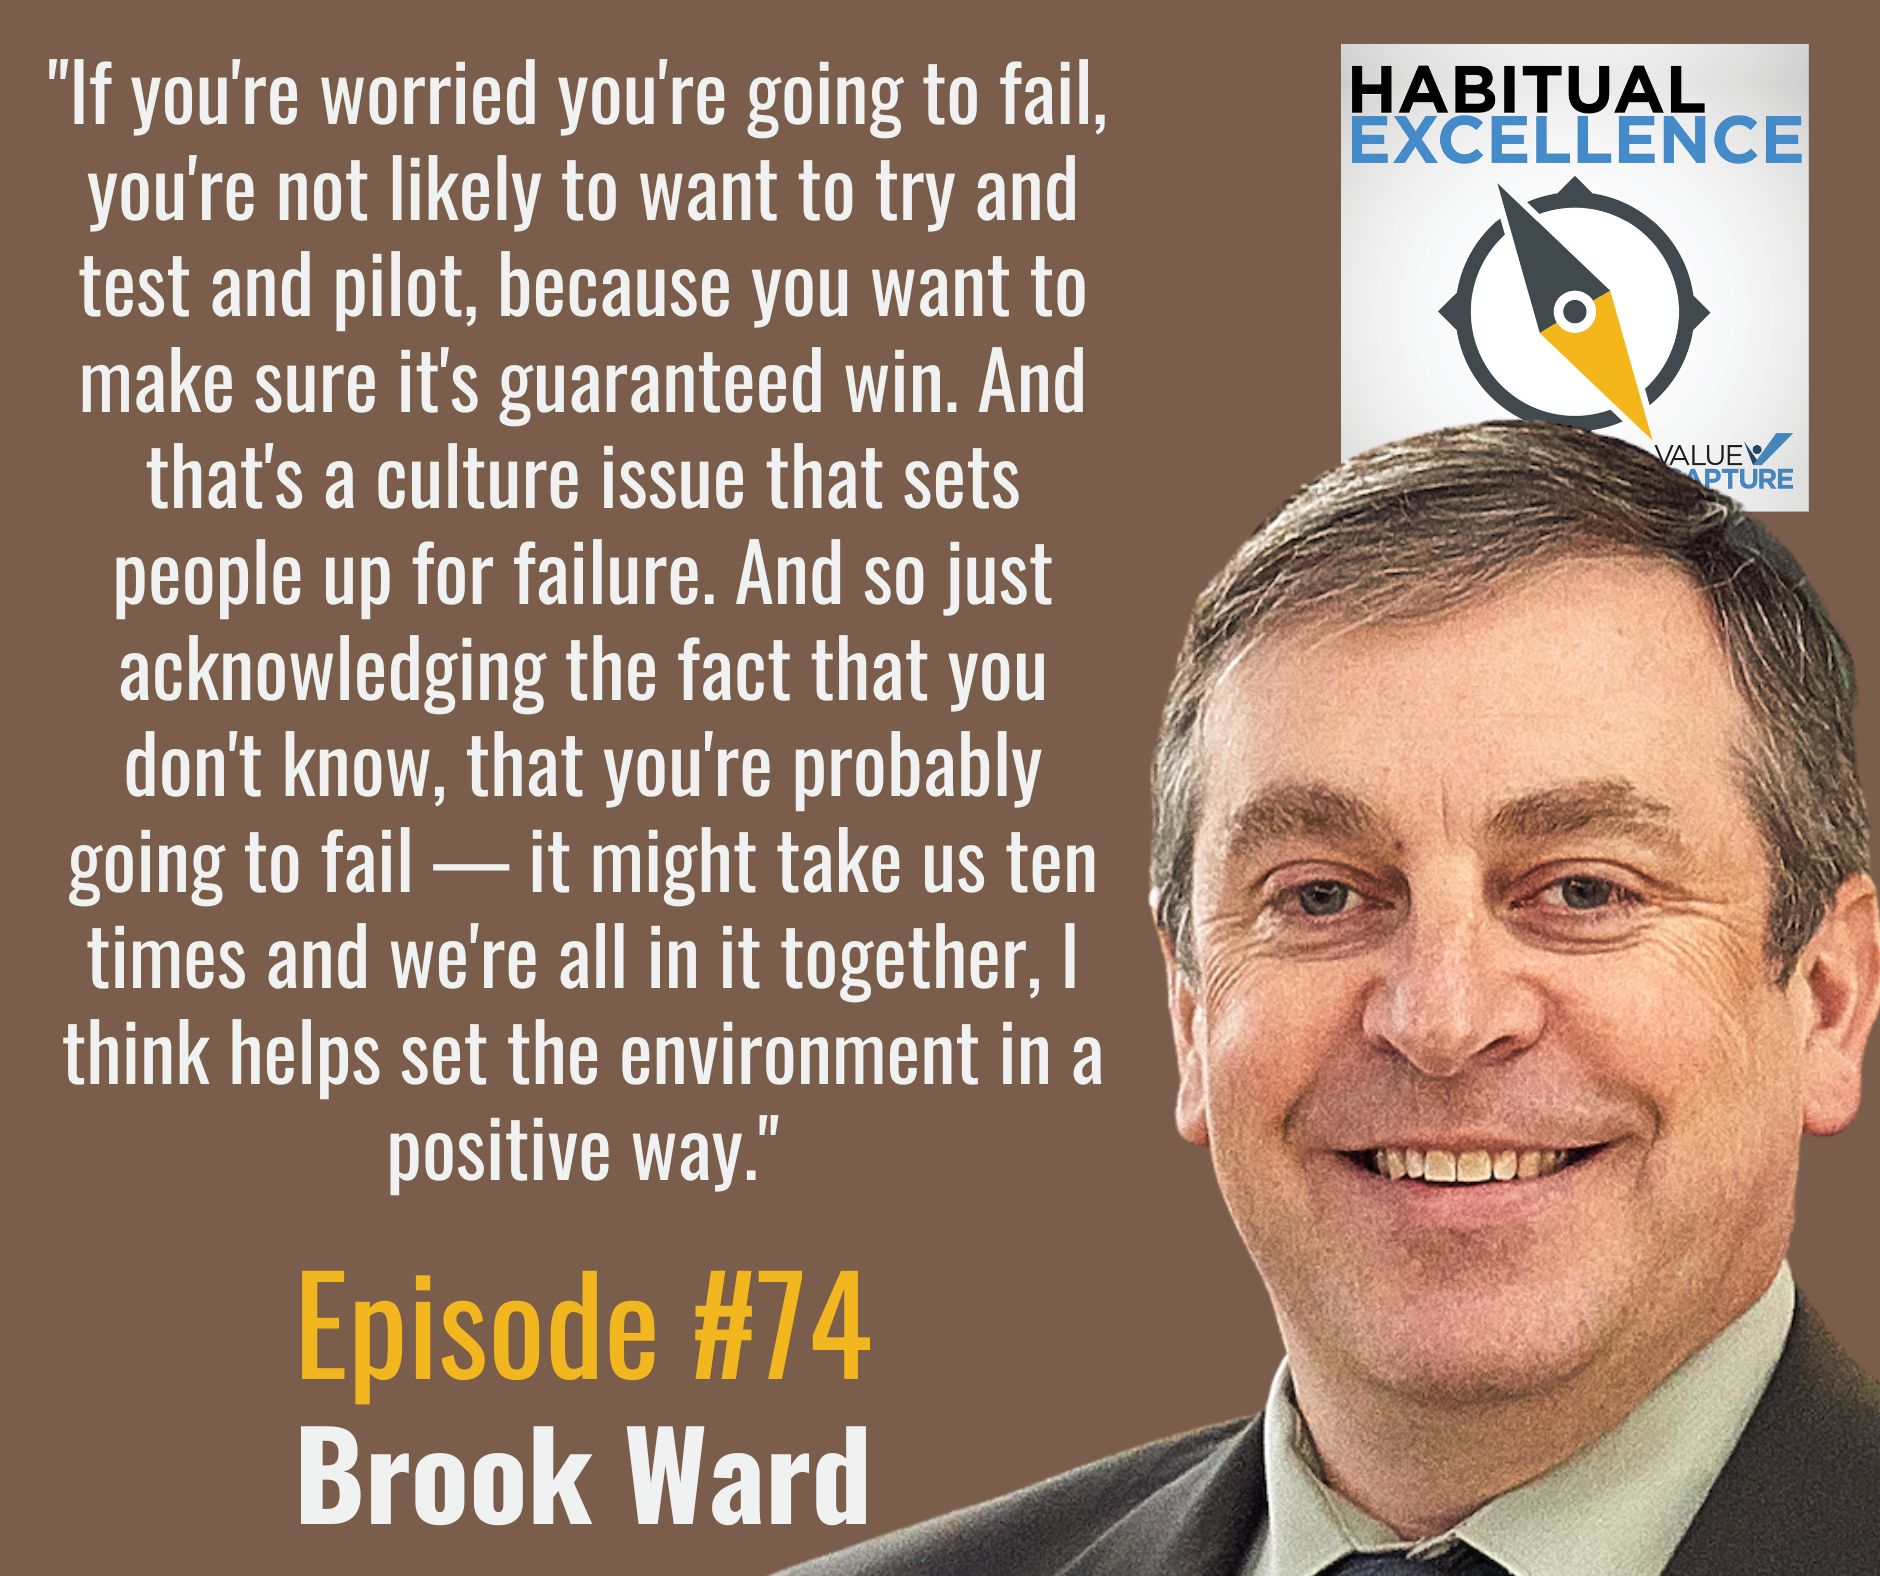 "If you're worried you're going to fail,  you're not likely to want to try and test and pilot, because you want to make sure it's guaranteed win. And that's a culture issue that sets people up for failure. And so just acknowledging the fact that you don't know, that you're probably going to fail — it might take us ten times and we're all in it together, I think helps set the environment in a positive way."